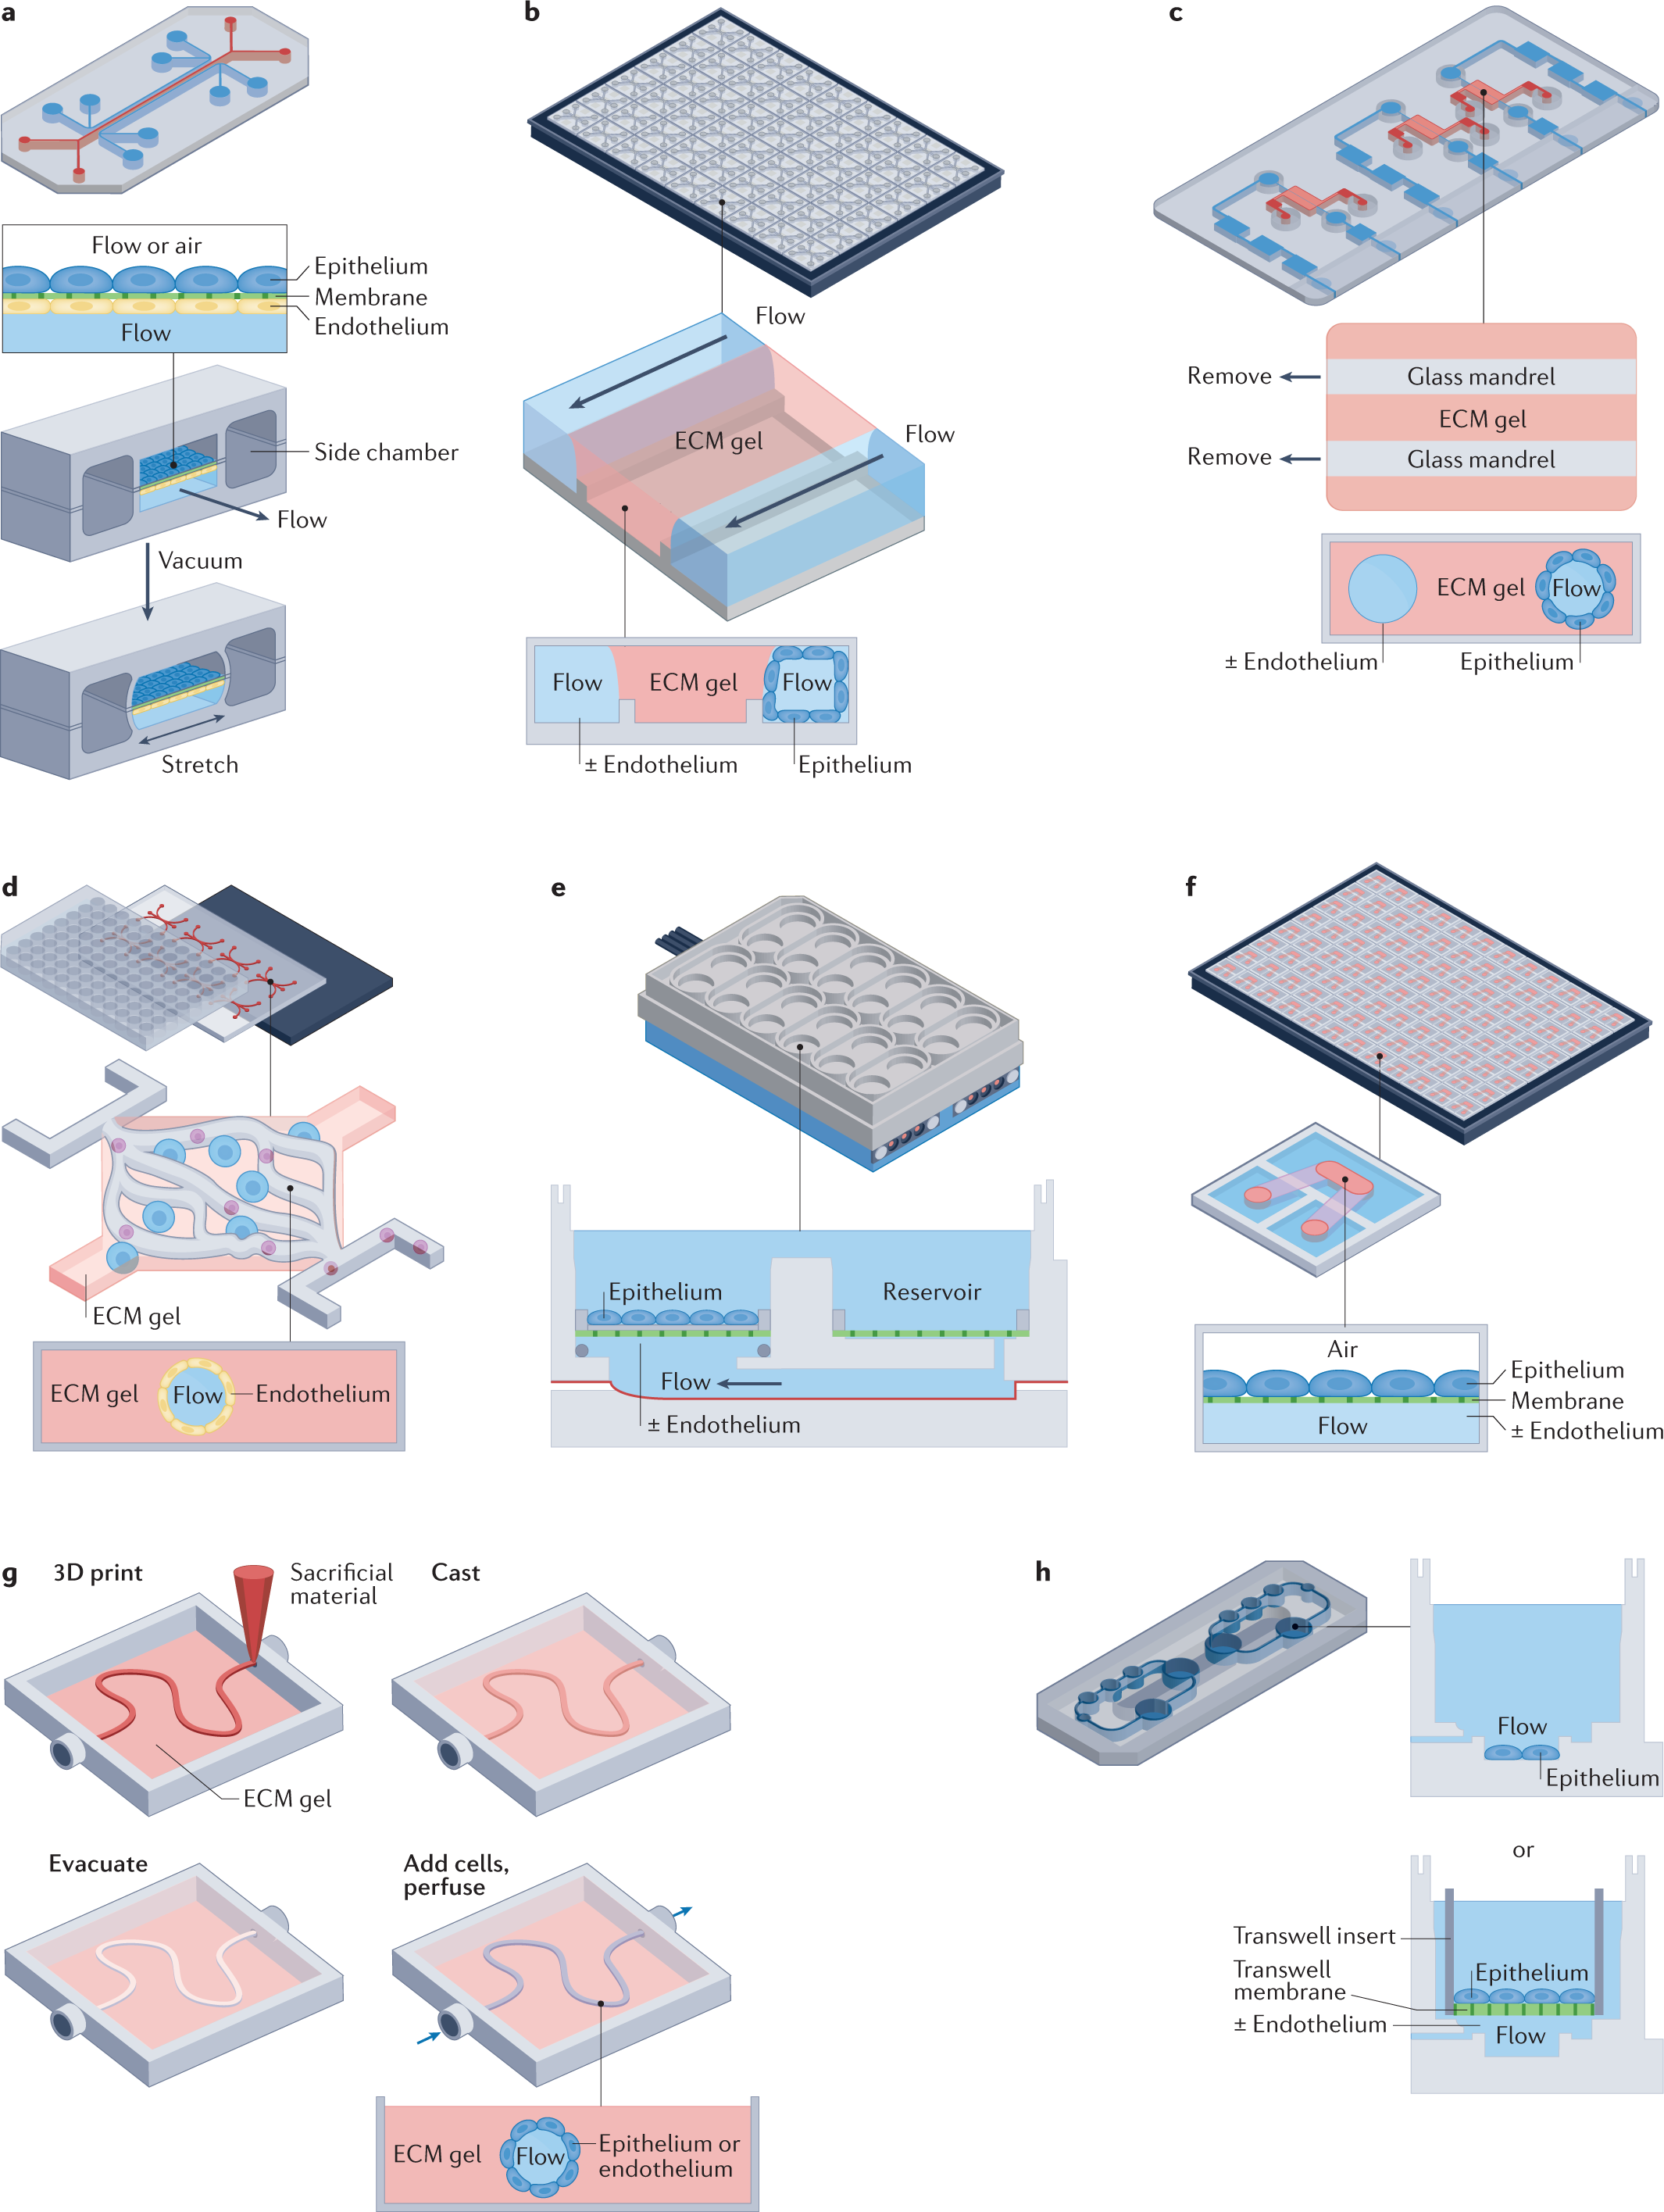 Human organs-on-chips for disease modelling, drug development and